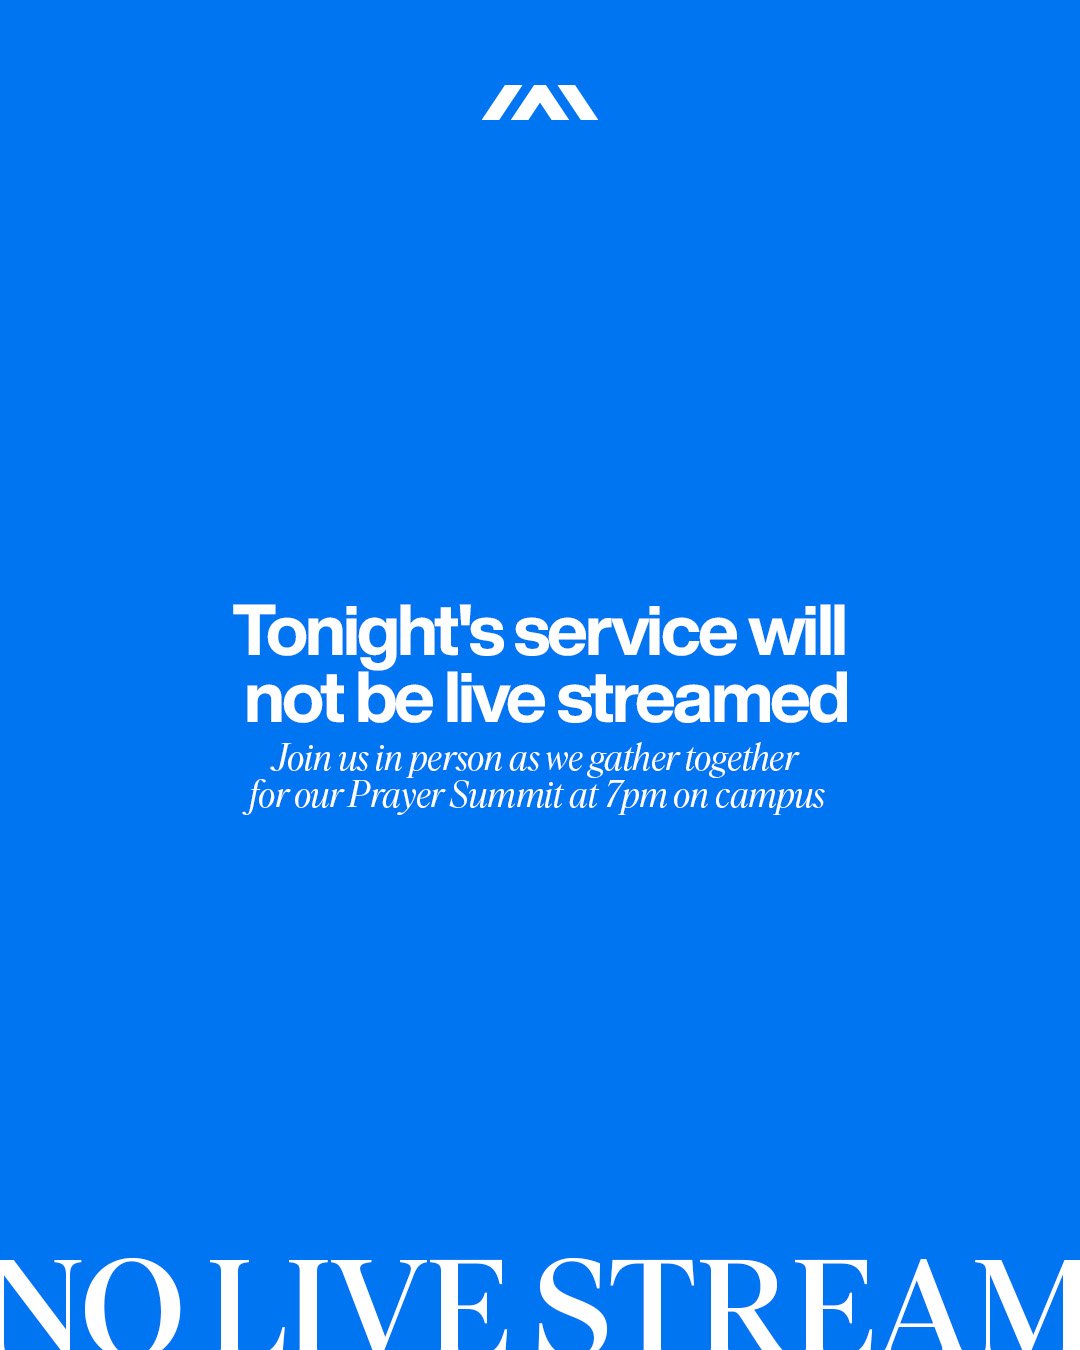 📣 Due to unforeseen circumstances beyond our control, we regret to inform you that tonight's service will not be live streamed.
--
🙌 However, we want to assure you that we are still having service and are eagerly anticipating what God has in store 